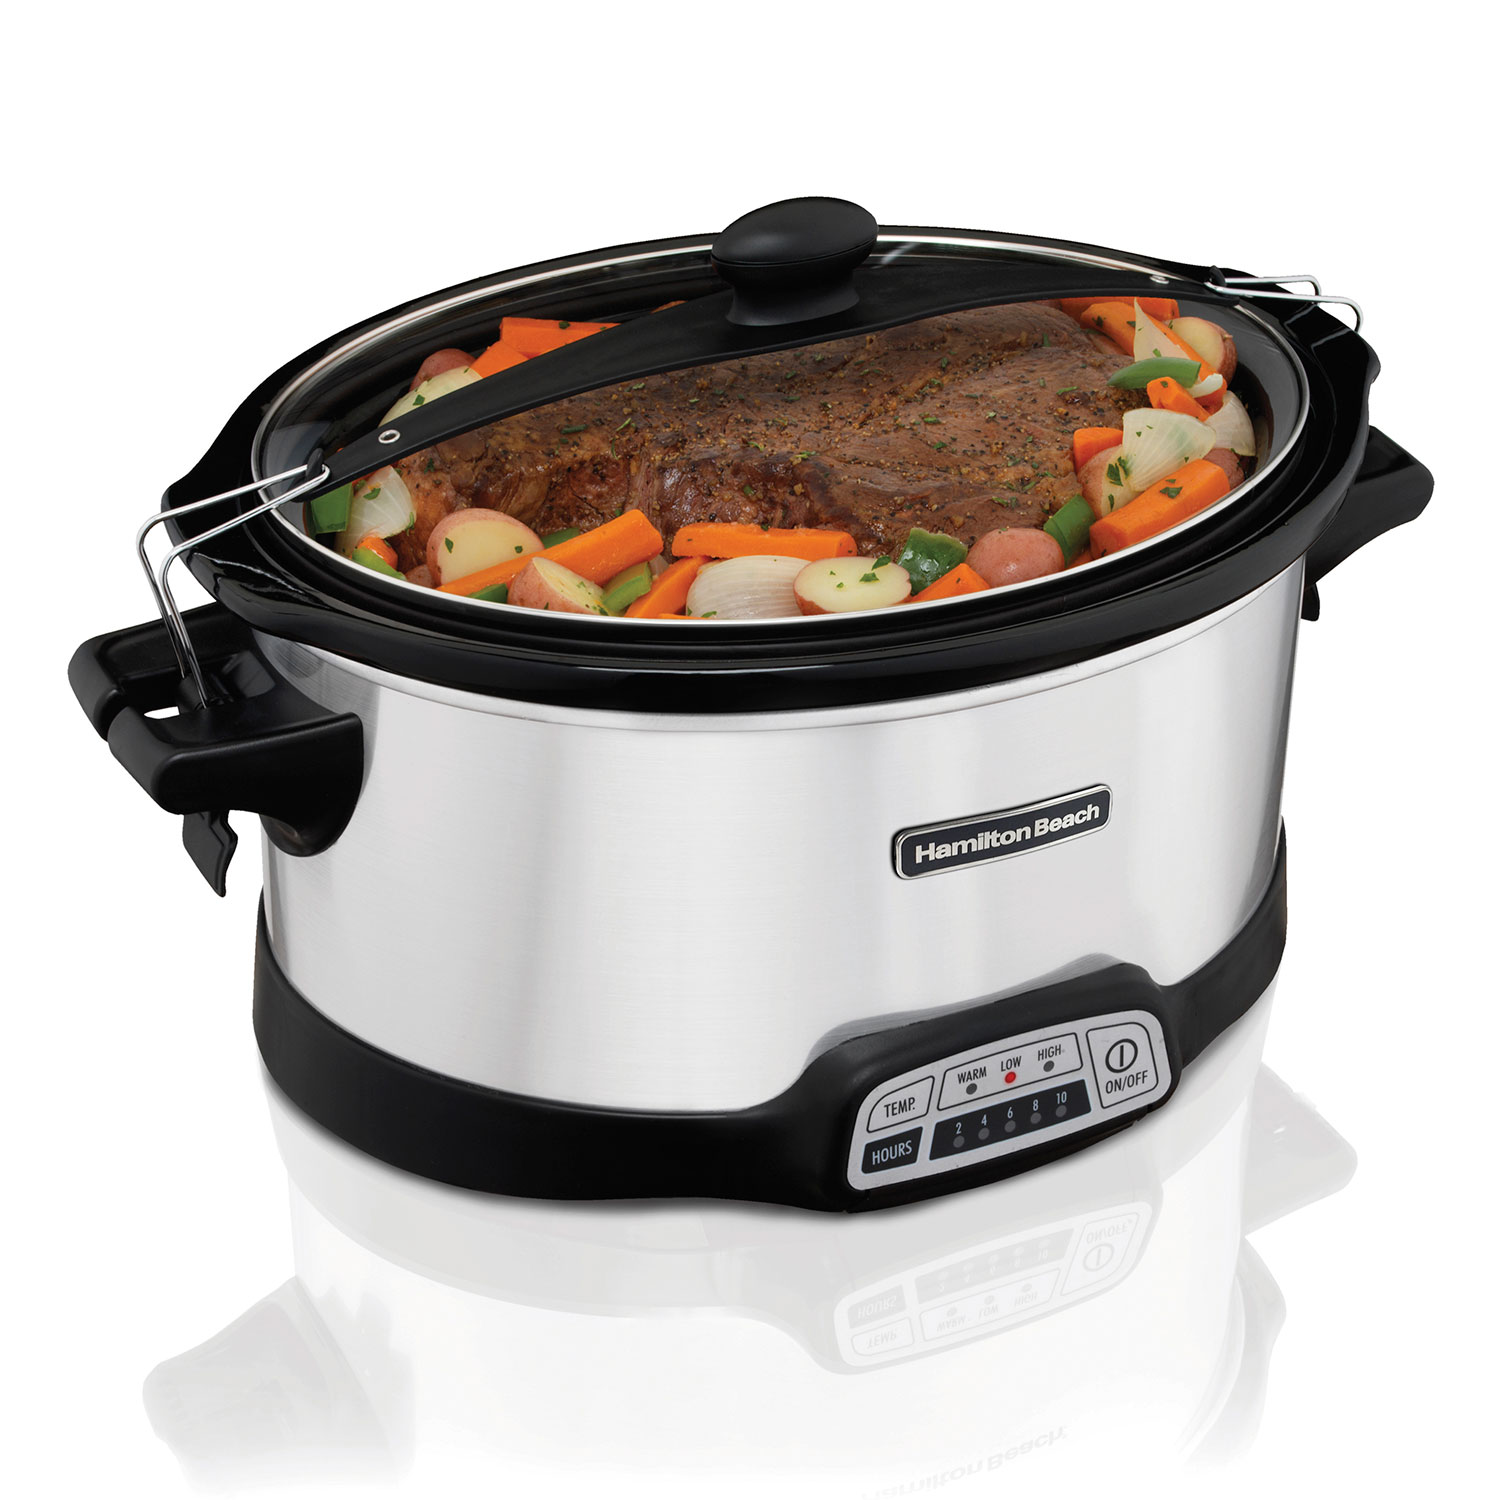 Stay or Go® Programmable Slow Cooker, Silver (33576N)